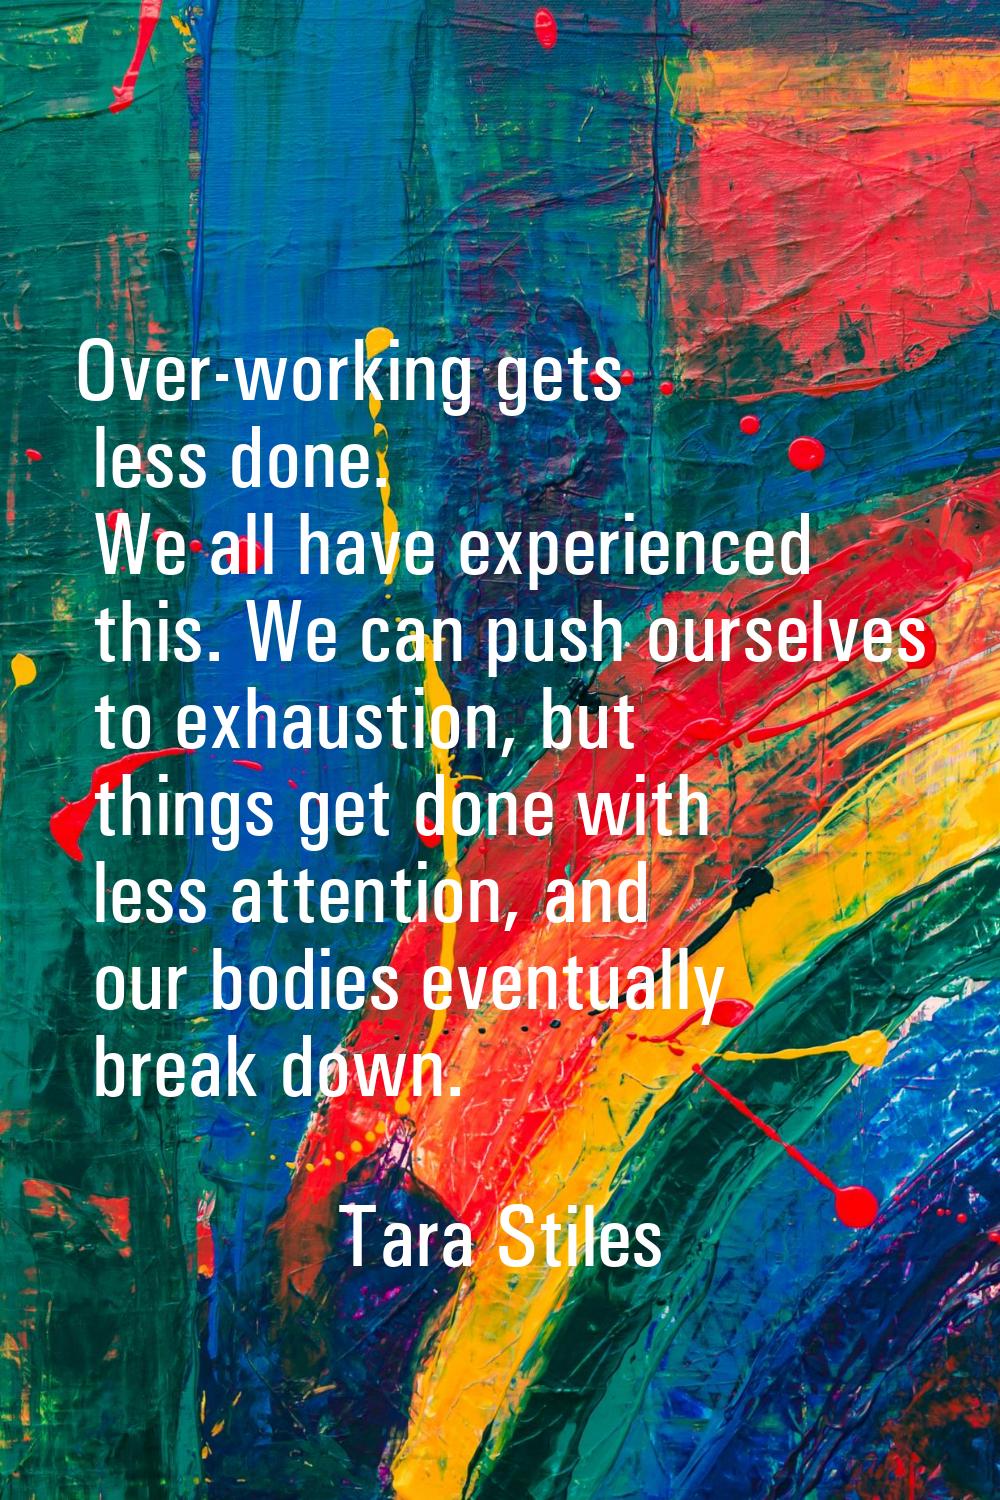 Over-working gets less done. We all have experienced this. We can push ourselves to exhaustion, but